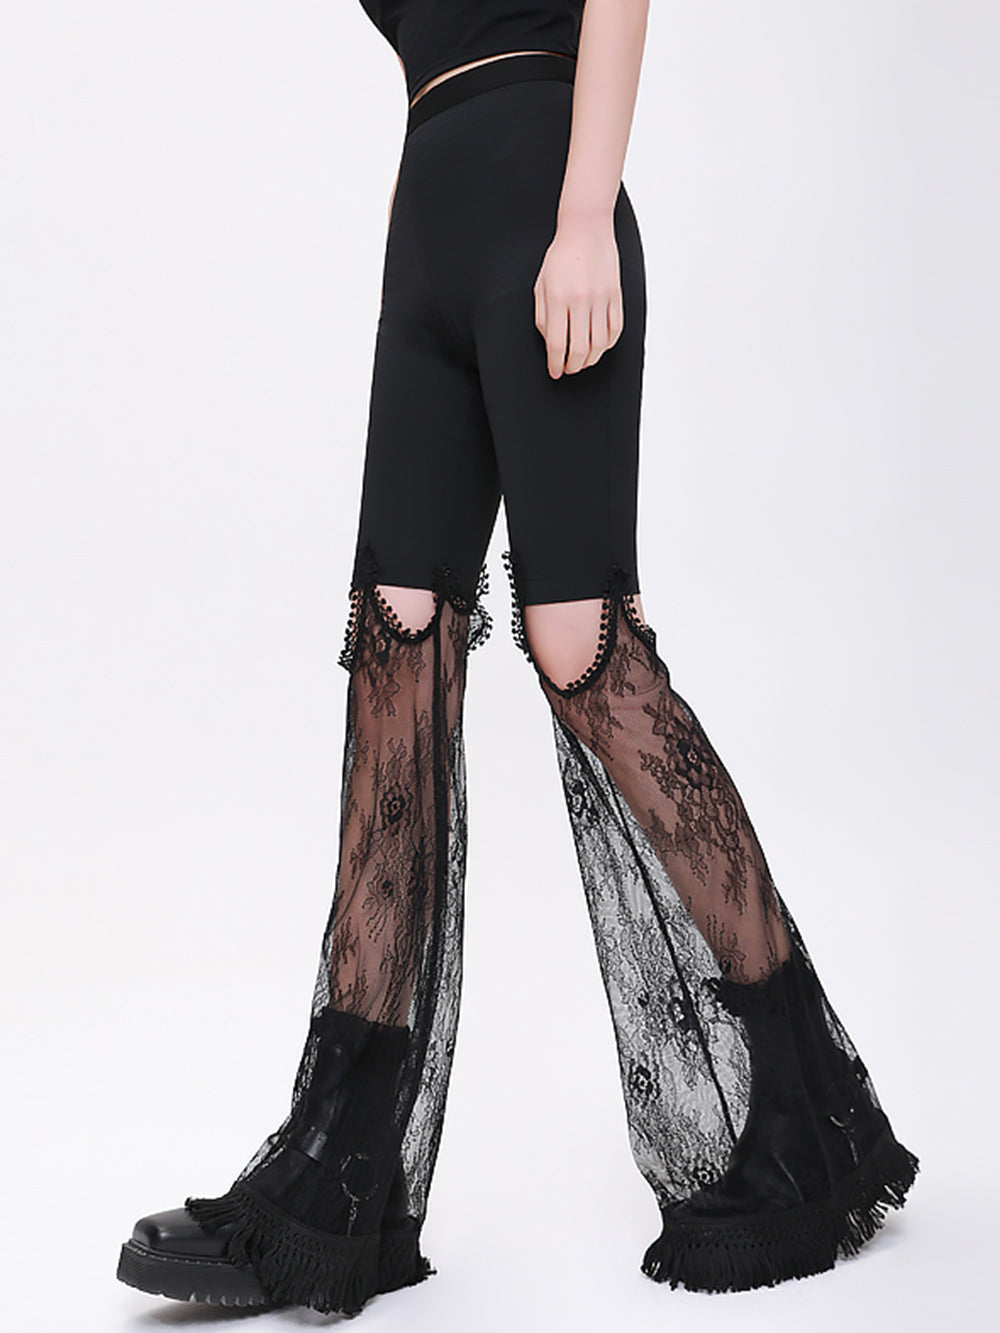 MUKTANK×CUUDICLAB Spliced Lace Flared Pants